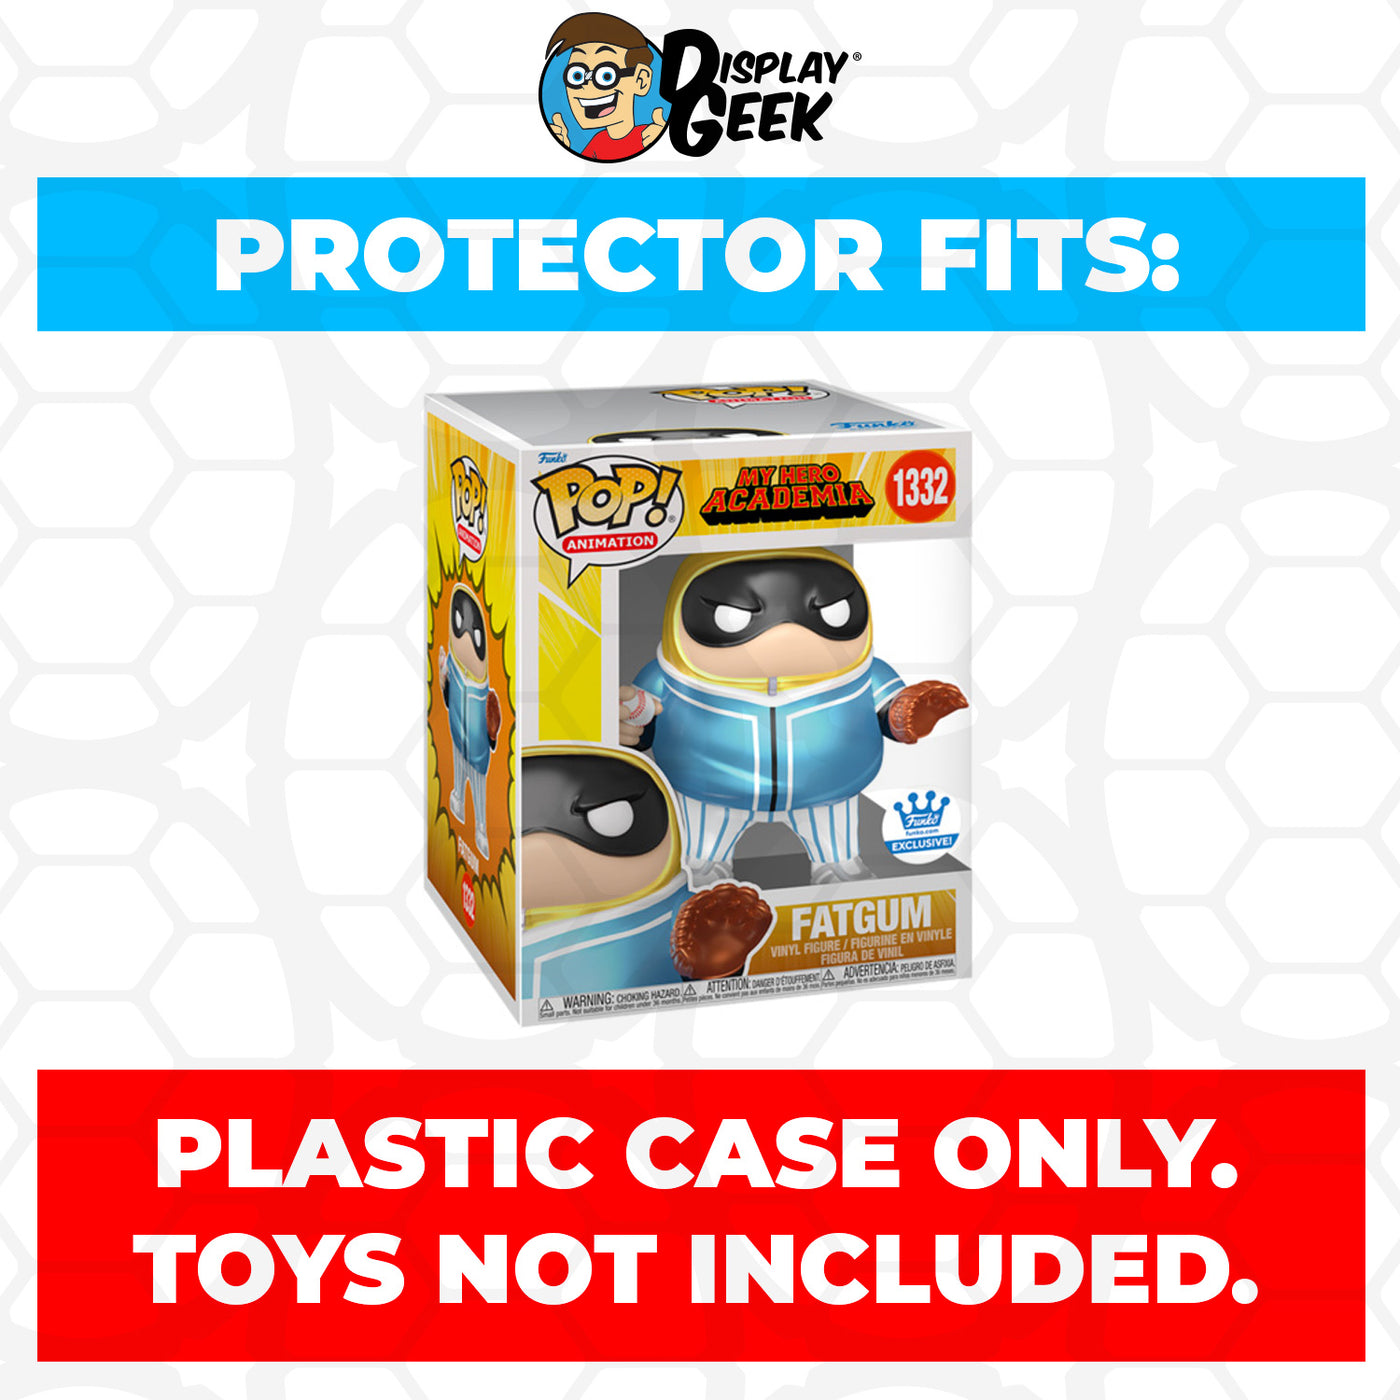 Pop Protector for 6 inch Fatgum HLB Baseball Metallic #1332 Super Size Funko Pop on The Protector Guide App by Display Geek